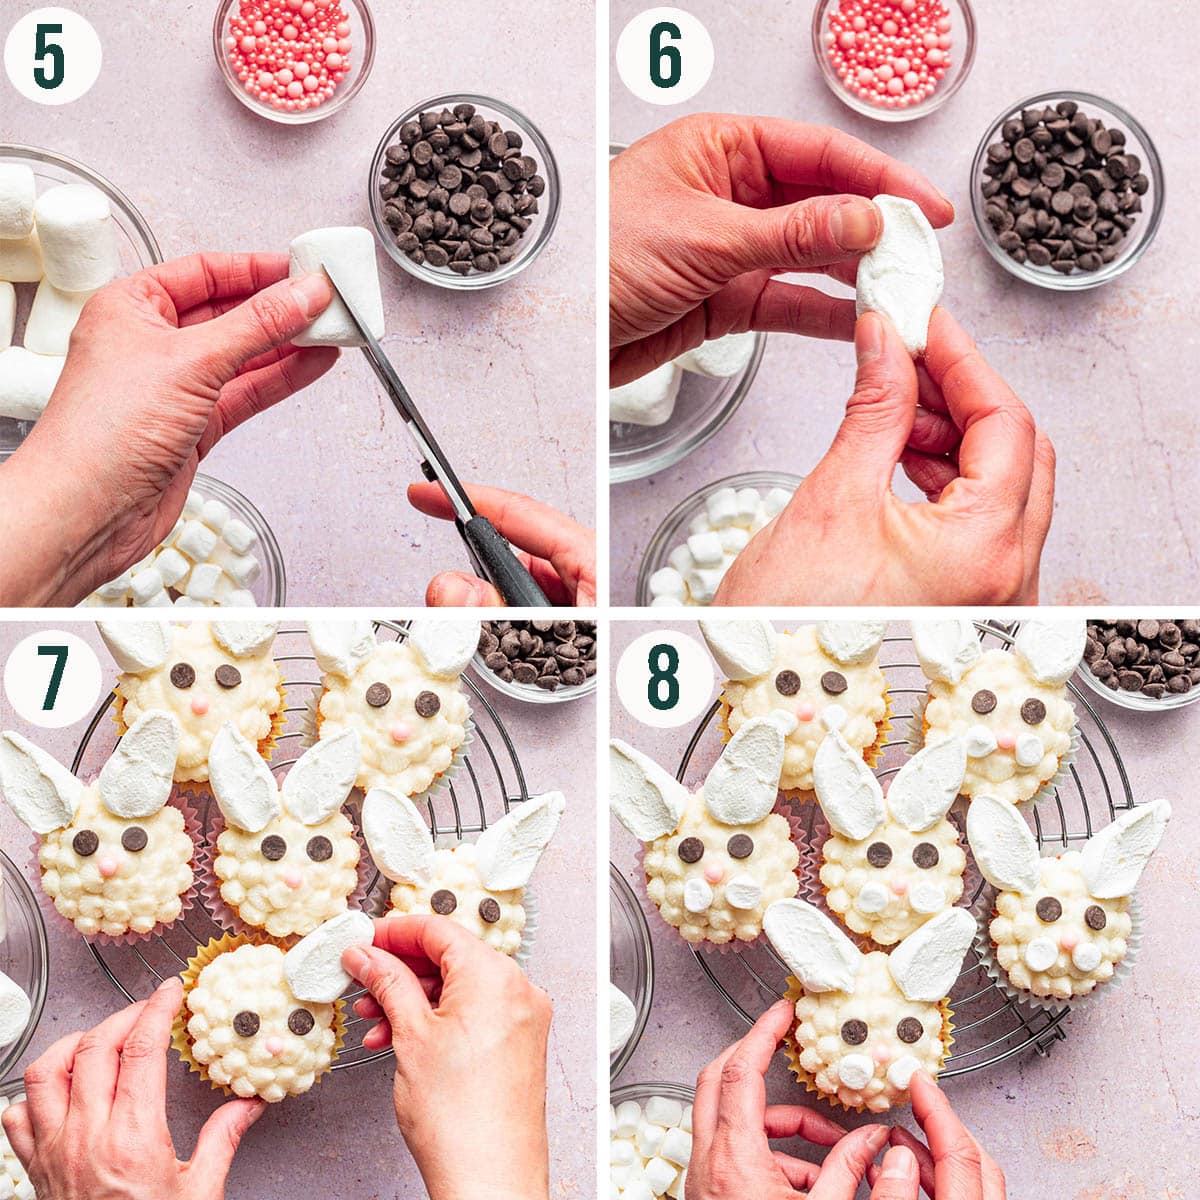 Bunny decorated cupcakes steps 5 to 8, cutting marshmallows and adding for ears and cheeks.